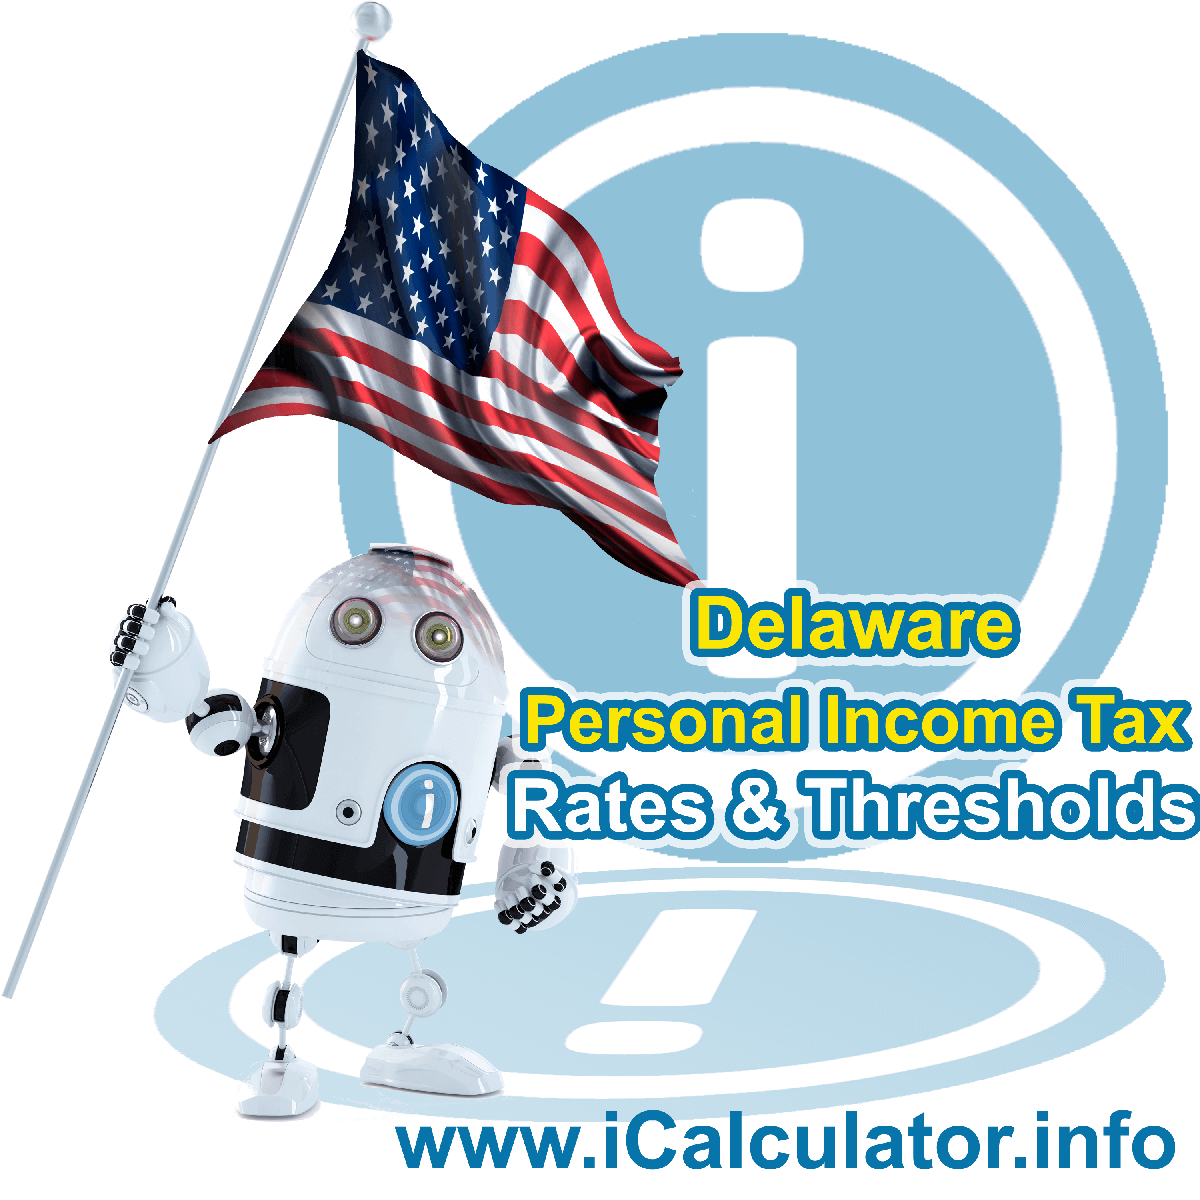 Delaware State Tax Tables 2022. This image displays details of the Delaware State Tax Tables for the 2022 tax return year which is provided in support of the 2022 US Tax Calculator